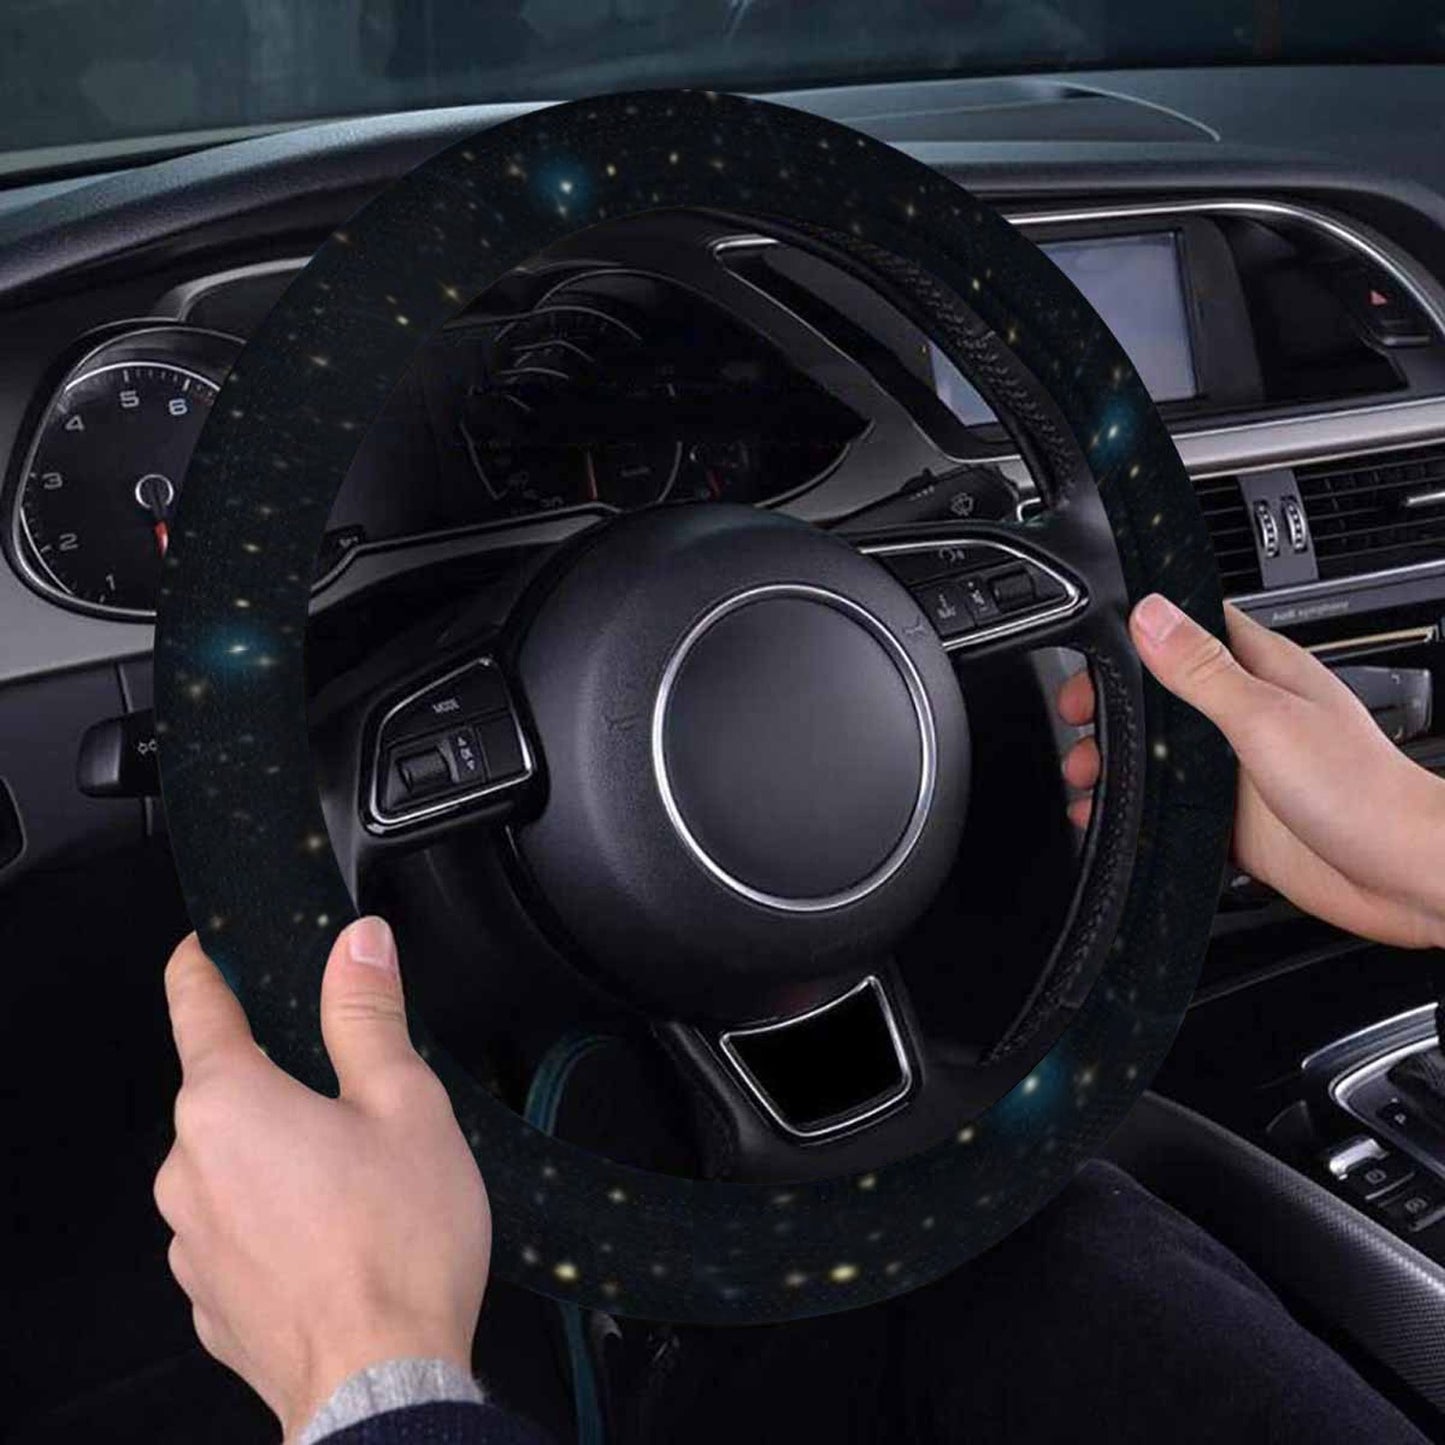 Constellation Steering Wheel Cover with Anti-Slip Insert, Space Stars Galaxy Night Sky Print Car Driving Auto Wrap Protector Women Men